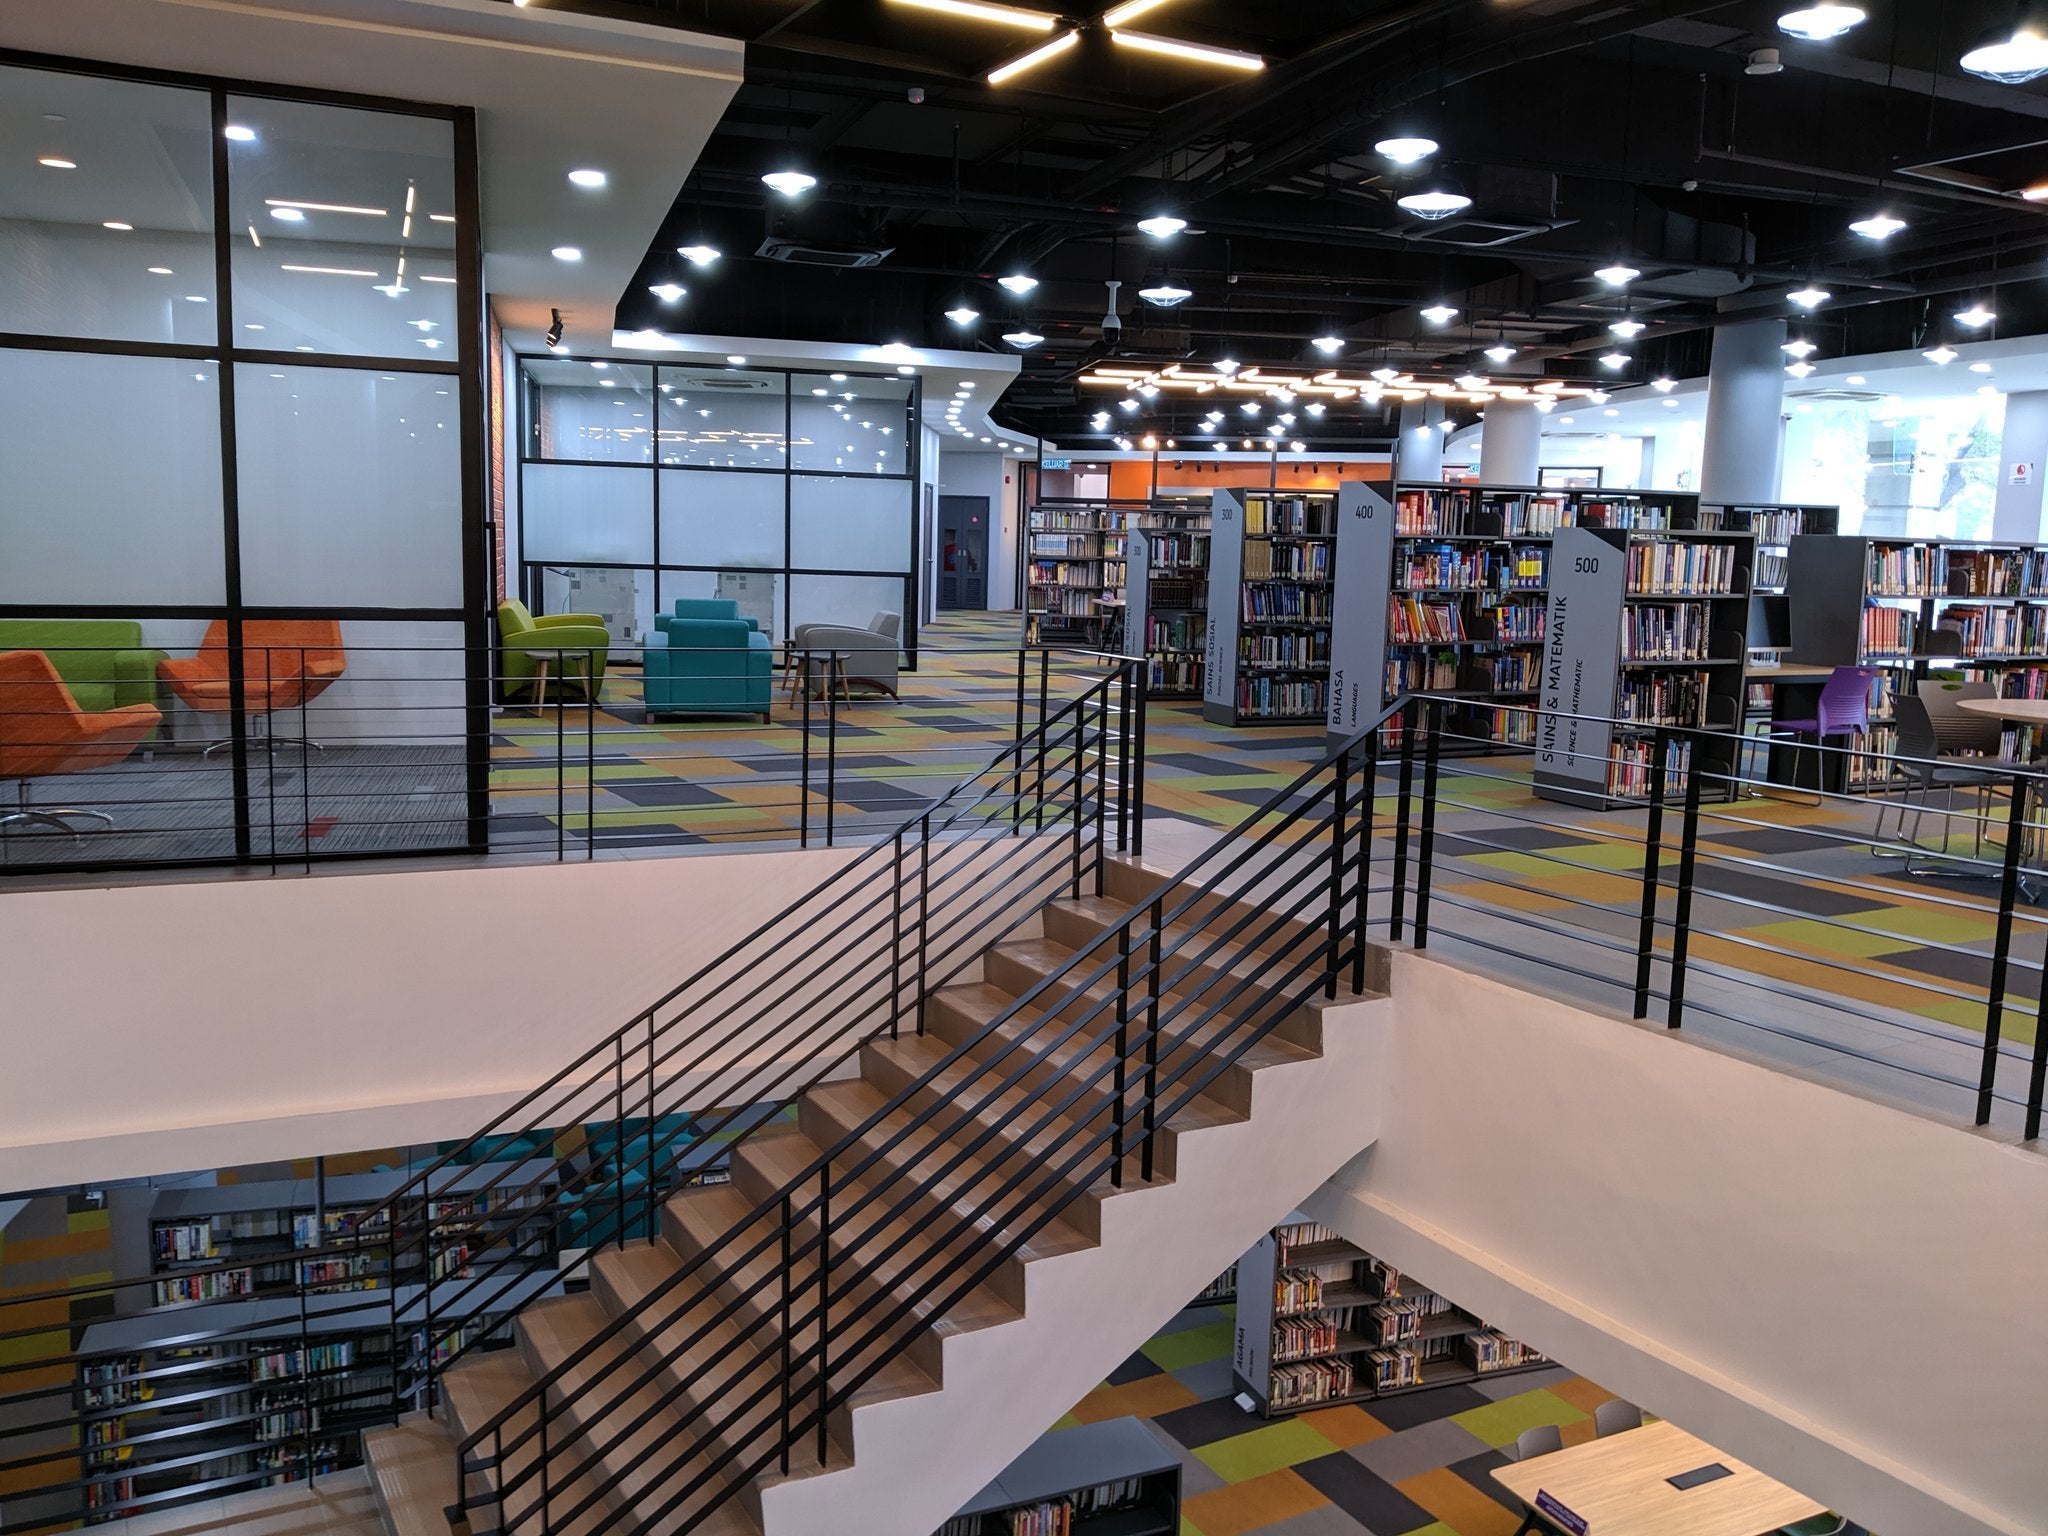 Don't Know Where To Go For A Date? How About The KL Library Where Everything Is Free! - WORLD OF BUZZ 4